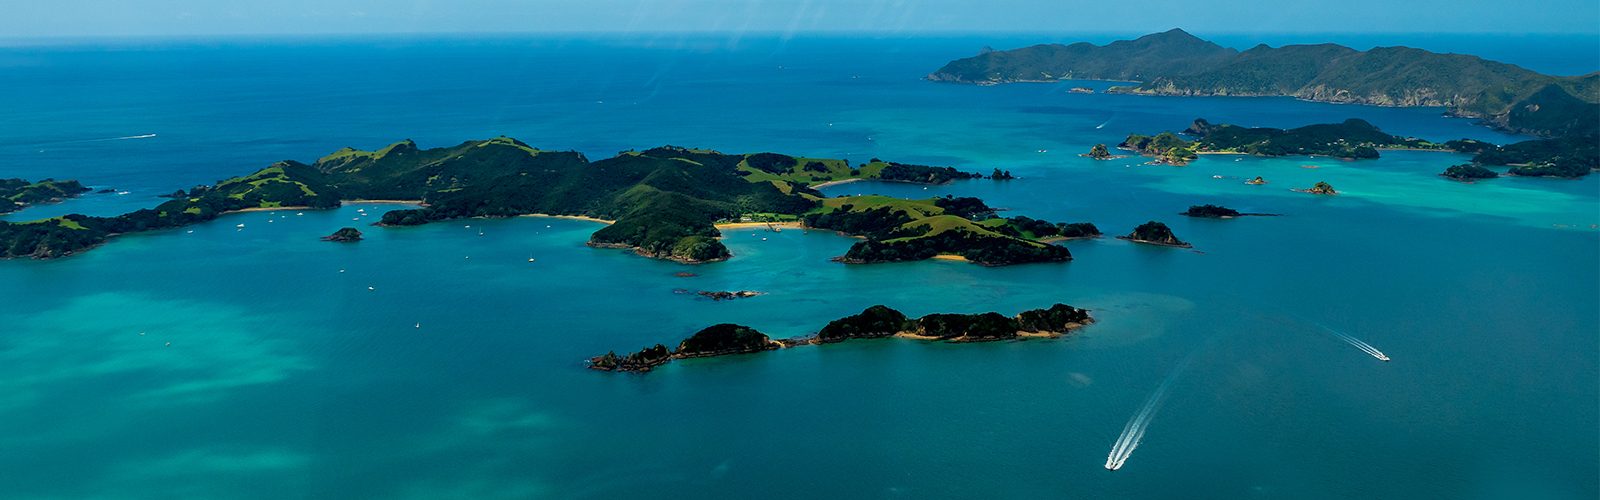 10 Things To Do In New Zealand Luxury New Zealand Holiday Packages Header